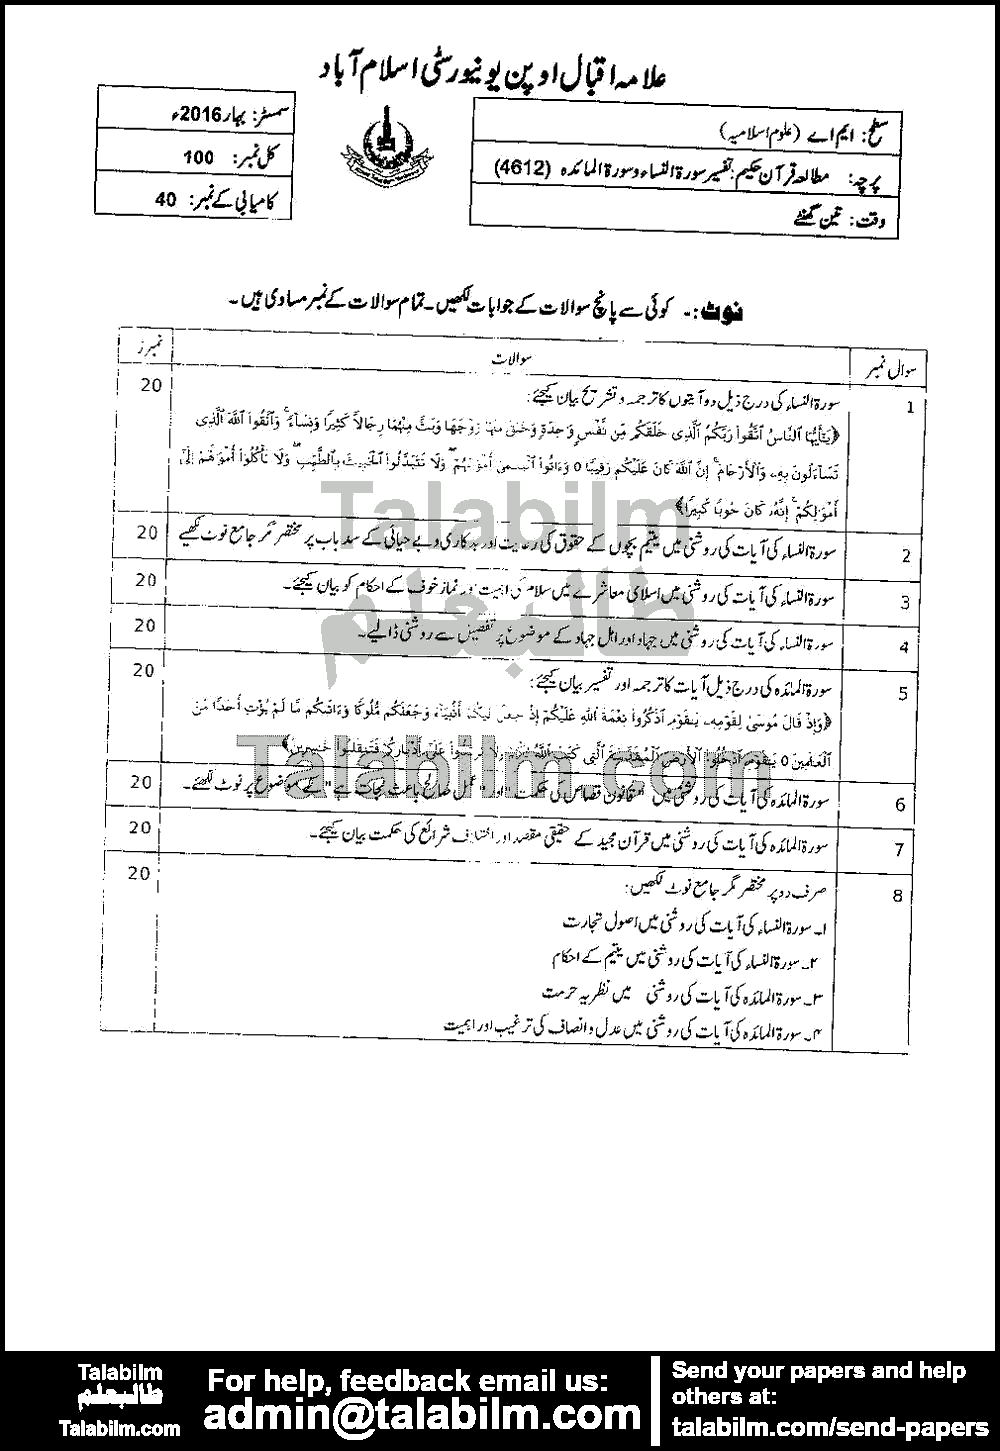 Study of Quran Hakim 4612 past paper for Spring 2016